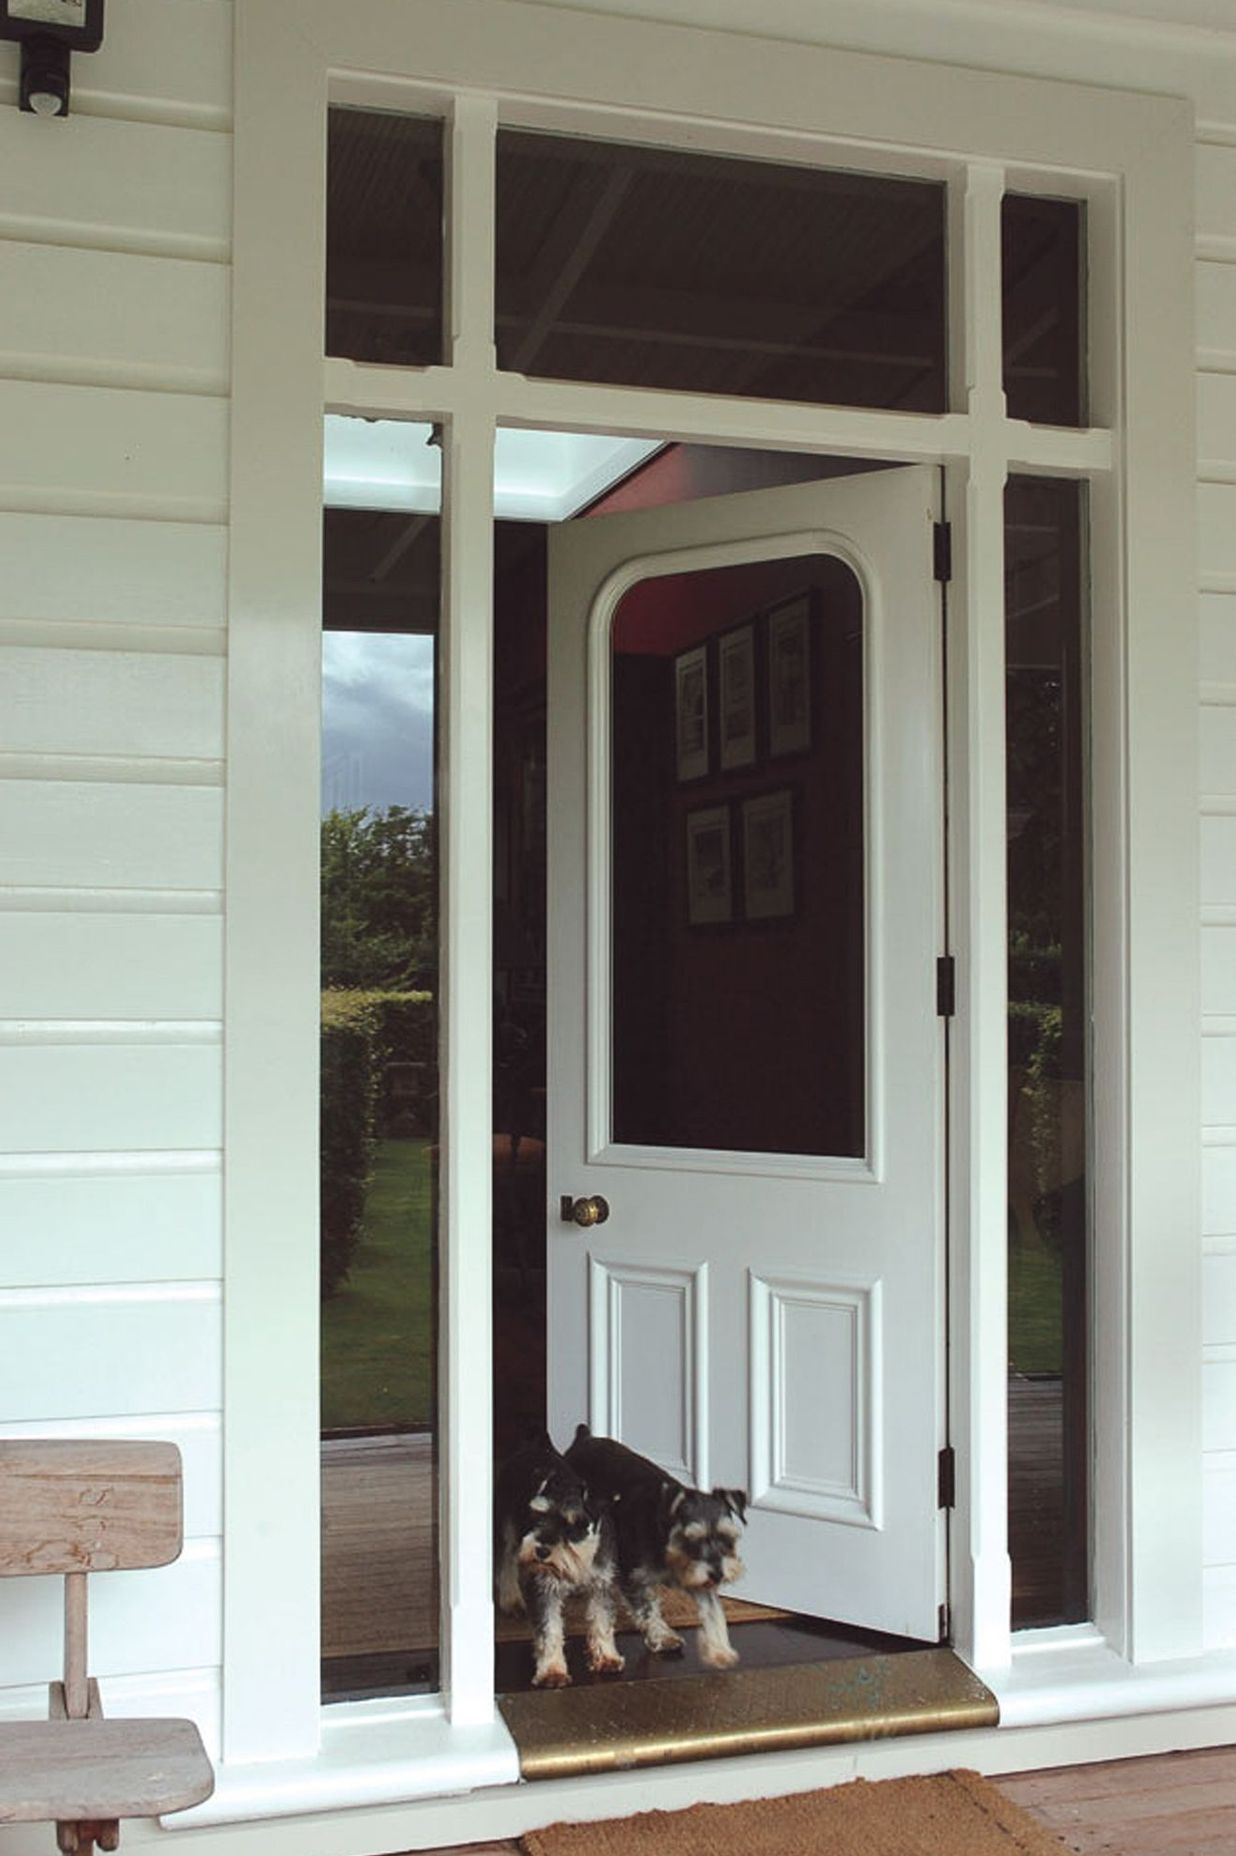 Jukens Quarter Sawn Clears are making high quality, custom made, solid wood doors and windows.